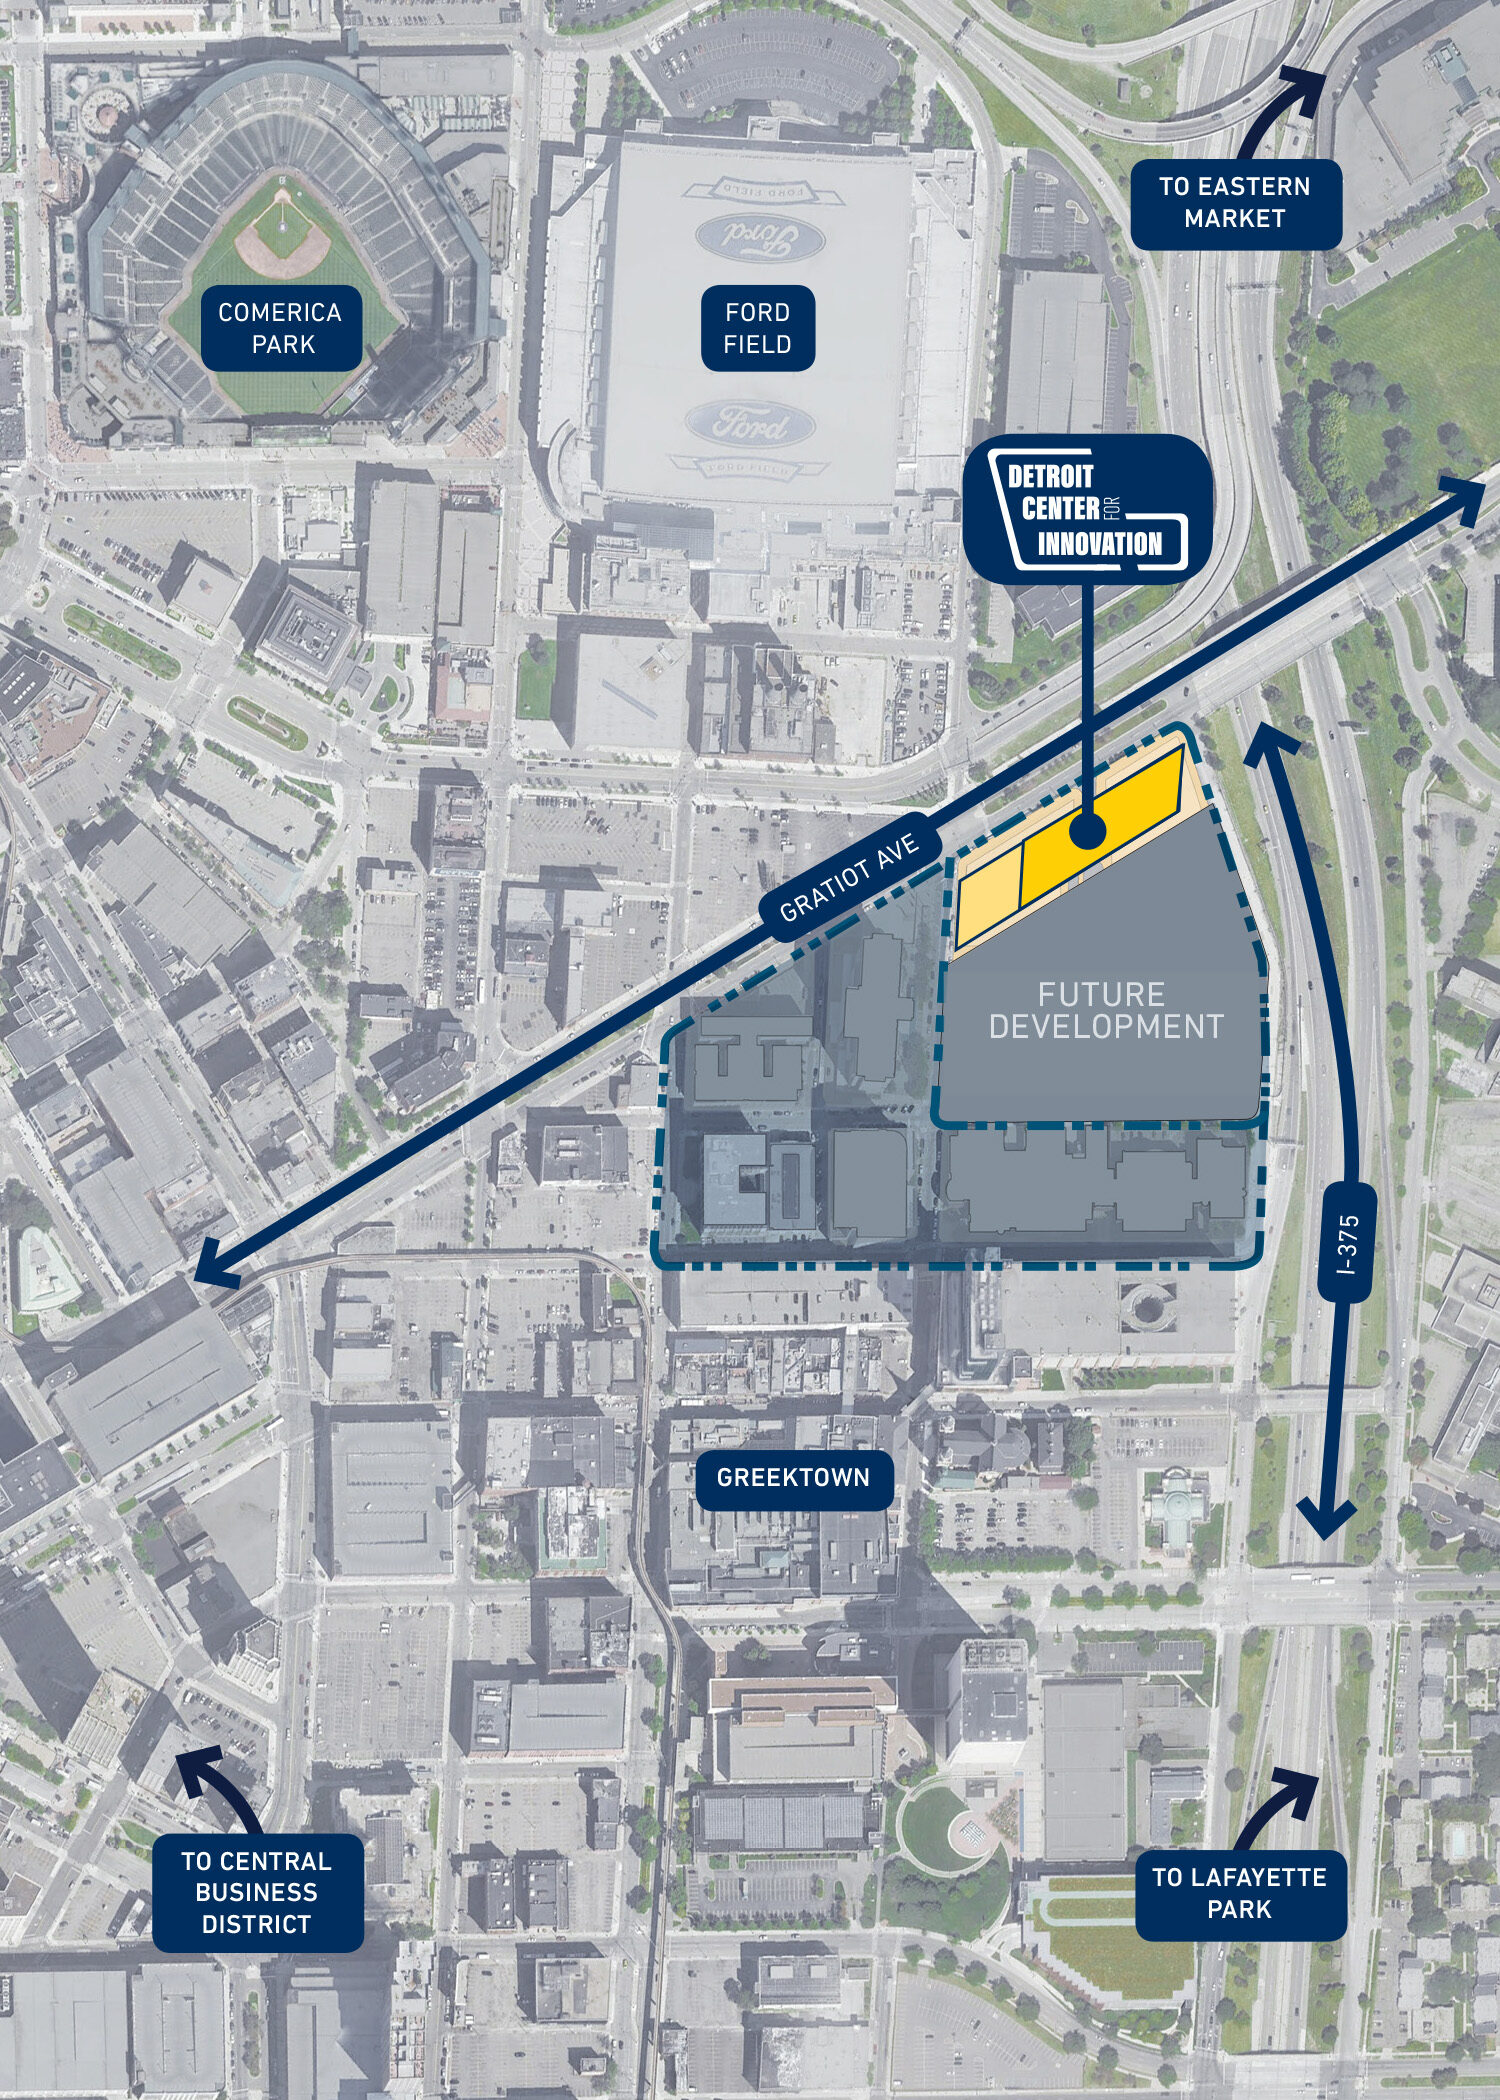 New $300 million UM research and education center to anchor 14-acre Detroit Center for Innovation in the heart of Detroit | UM Detroit - University of Michigan News